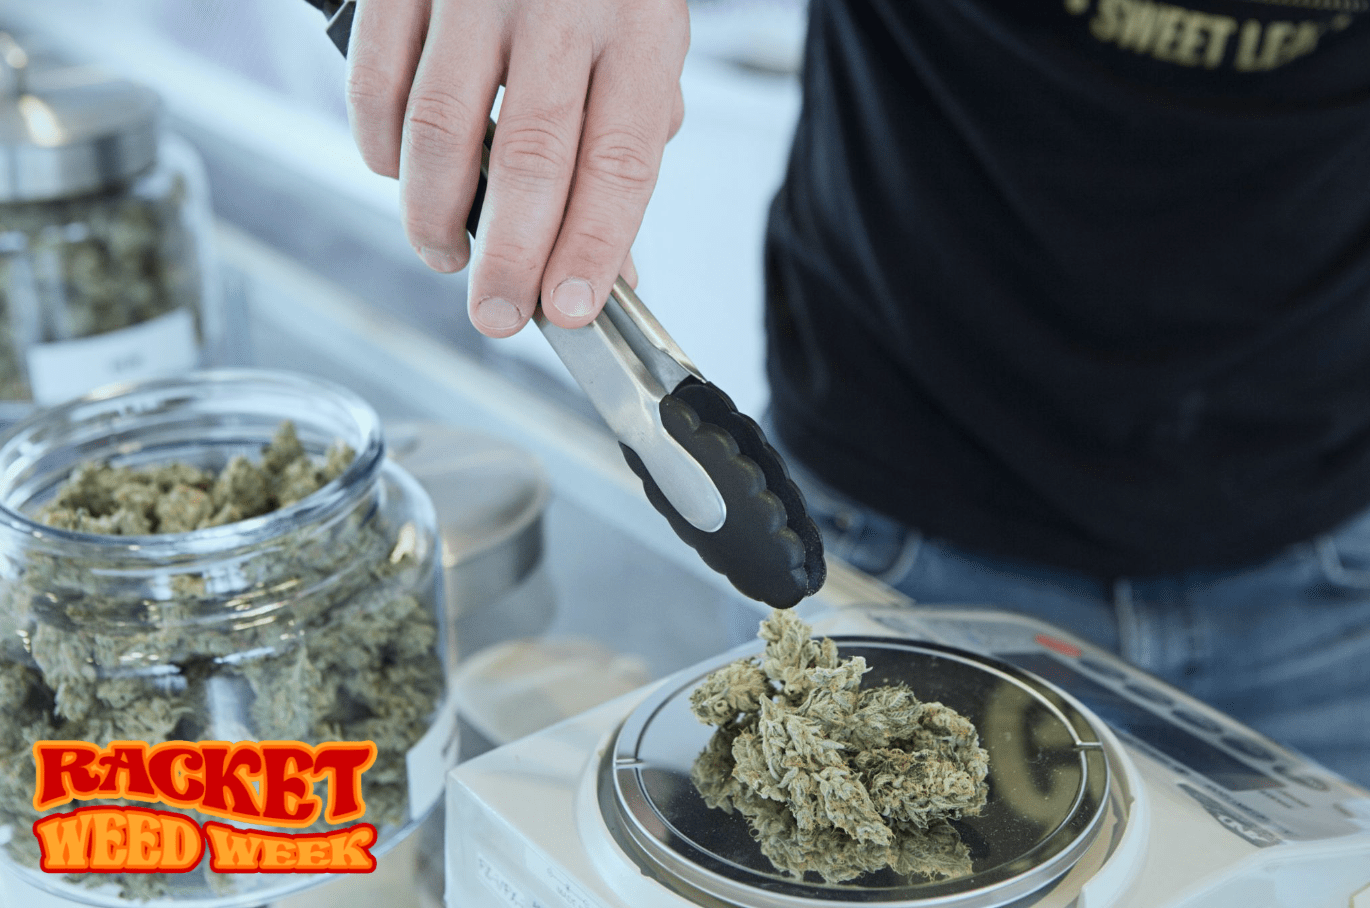 a hand holding tongs over a scale loaded up with cannabis flower